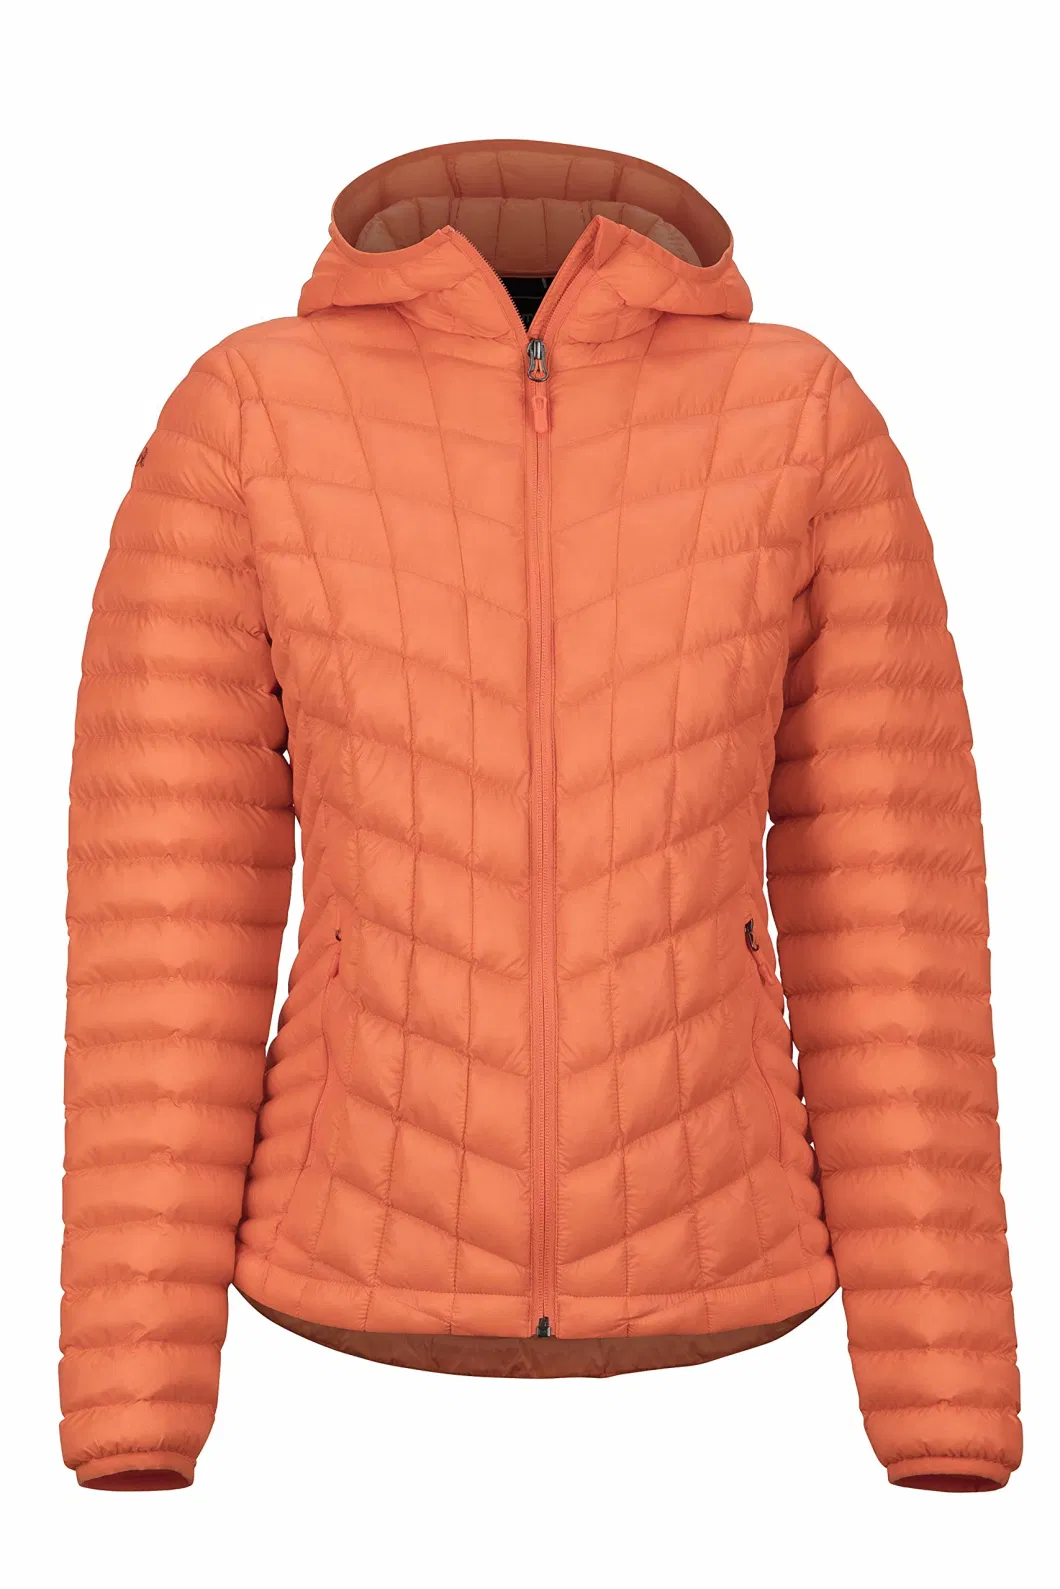 Asiapo China Factory Women&prime;s High Quality Lightweight Packable Warm Hooded Down Jacket